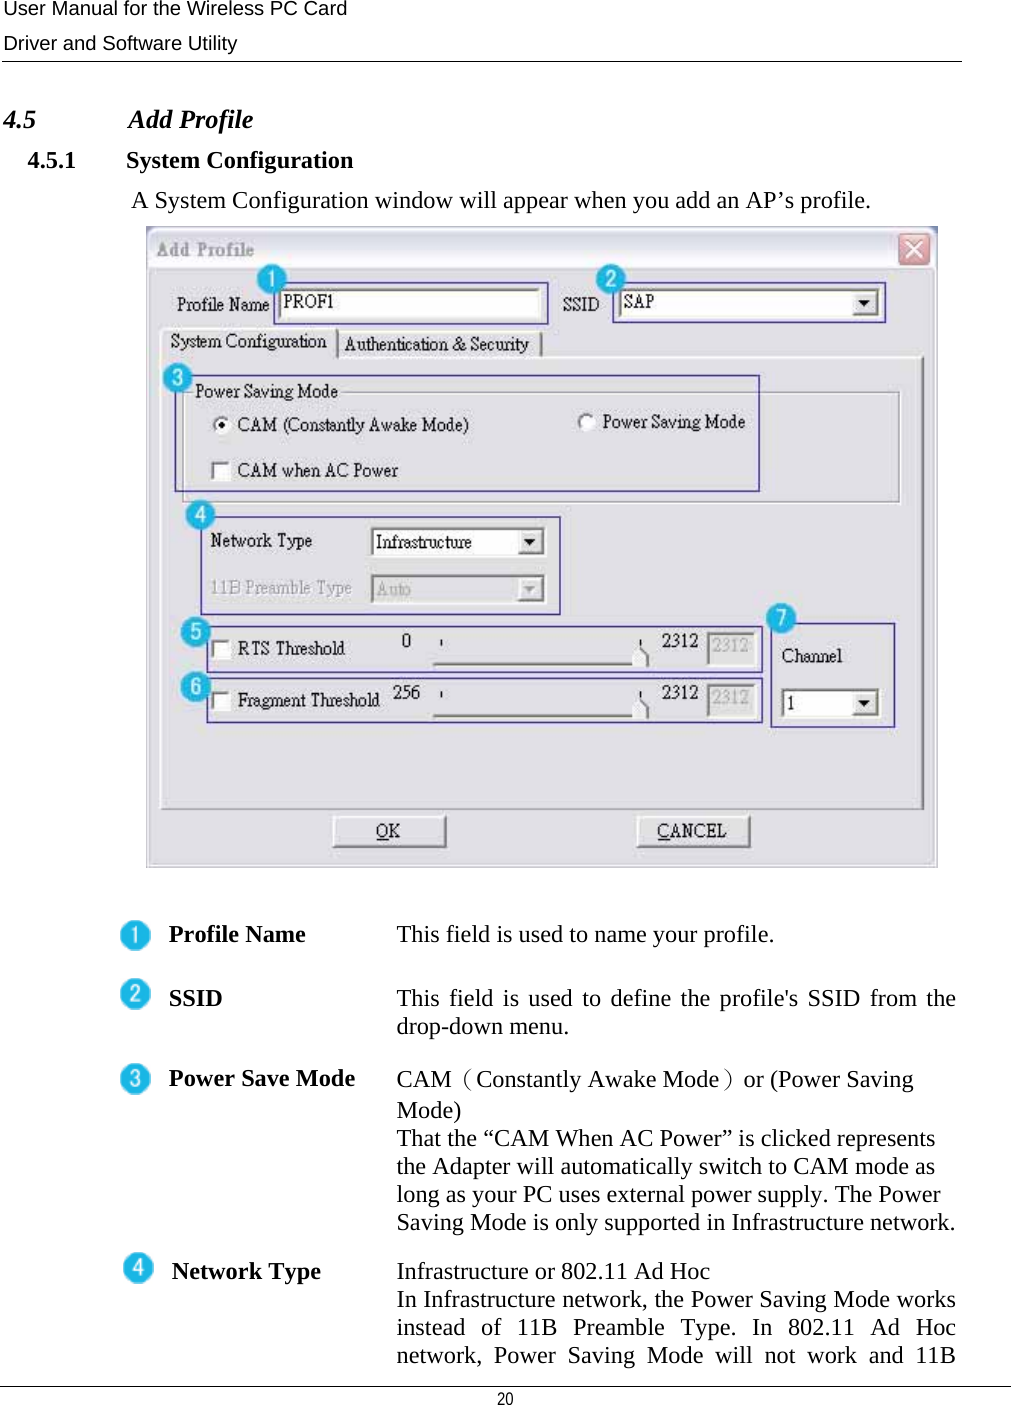 User Manual for the Wireless PC Card Driver and Software Utility  20   4.5              Add Profile 4.5.1        System Configuration A System Configuration window will appear when you add an AP’s profile.   Profile Name  This field is used to name your profile. SSID  This field is used to define the profile&apos;s SSID from the drop-down menu. Power Save Mode  CAM（Constantly Awake Mode）or (Power Saving Mode)  That the “CAM When AC Power” is clicked represents the Adapter will automatically switch to CAM mode as long as your PC uses external power supply. The Power Saving Mode is only supported in Infrastructure network.Network Type  Infrastructure or 802.11 Ad Hoc In Infrastructure network, the Power Saving Mode works instead of 11B Preamble Type. In 802.11 Ad Hocnetwork, Power Saving Mode will not work and 11B 